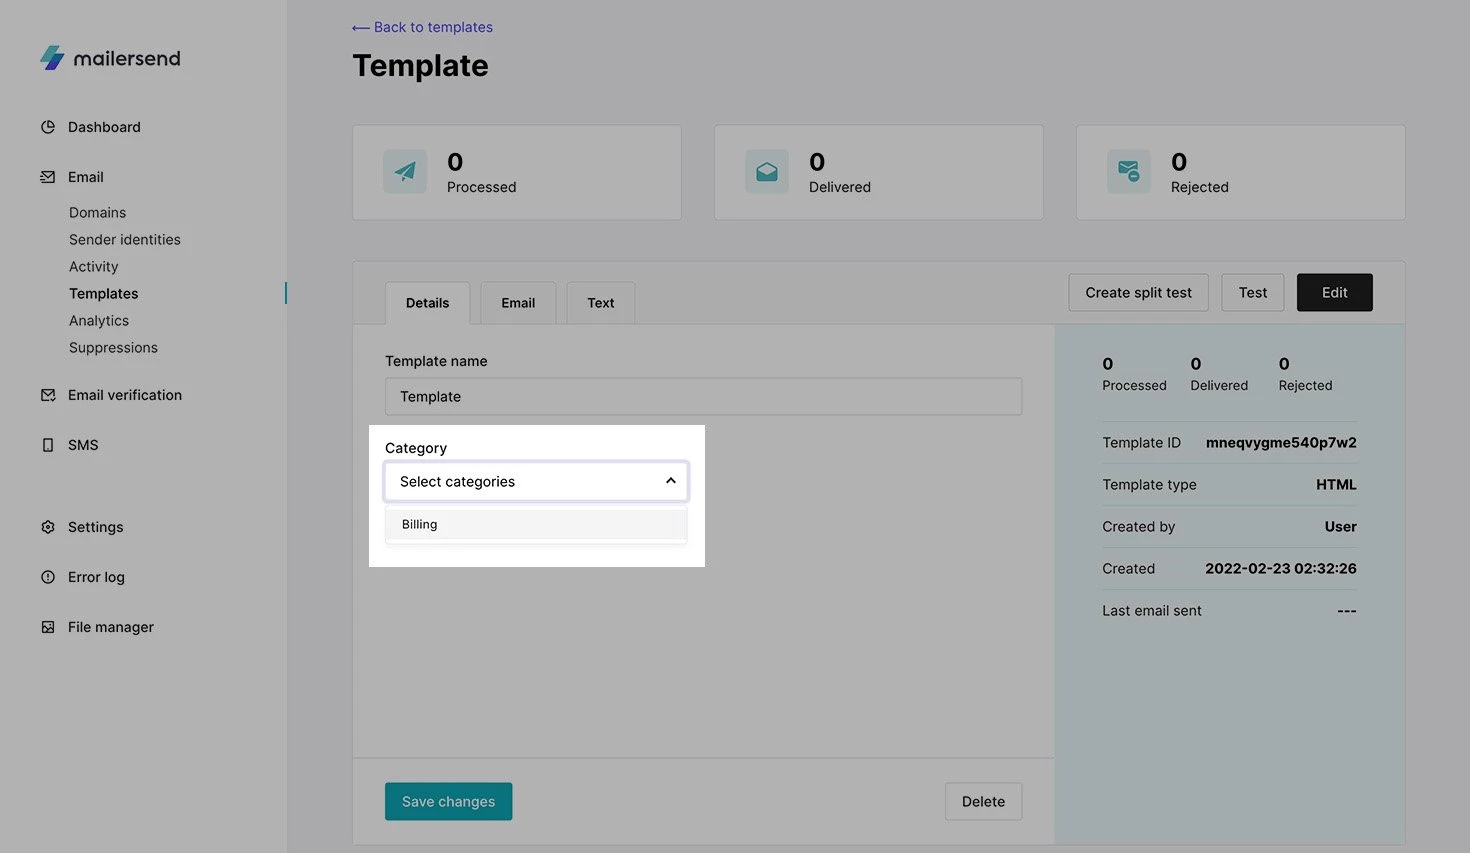 View of template page with category selection drop down.